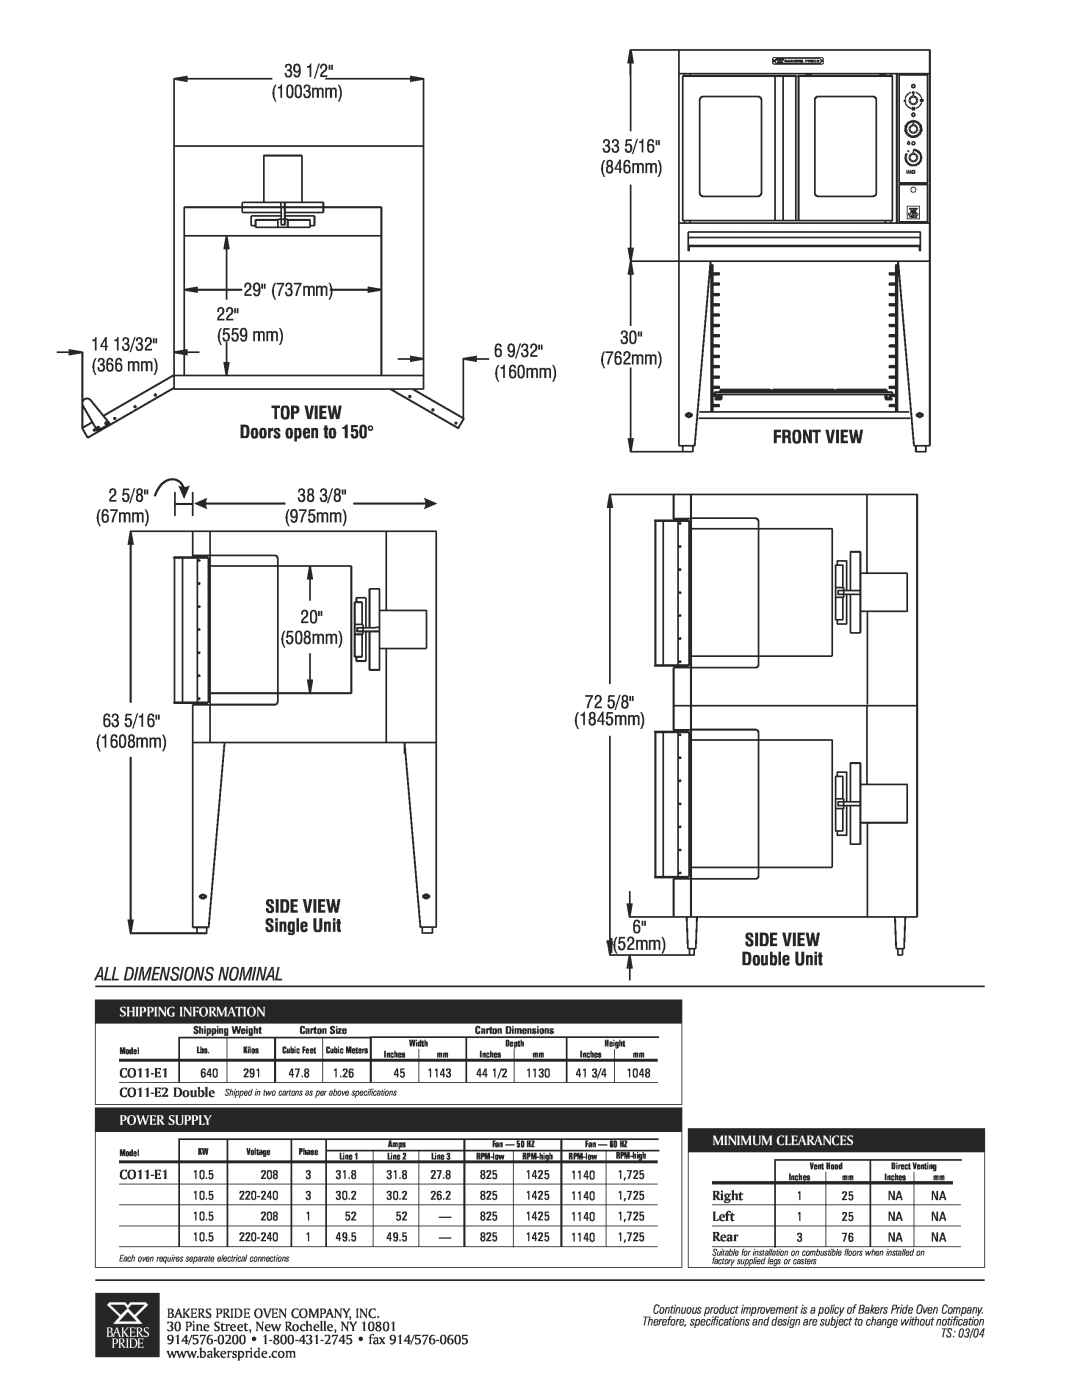 Bakers Pride Oven CO11-E2 TOP VIEW Doors open to, Front View, Side View, Single Unit, 152mm, All Dimensions Nominal 